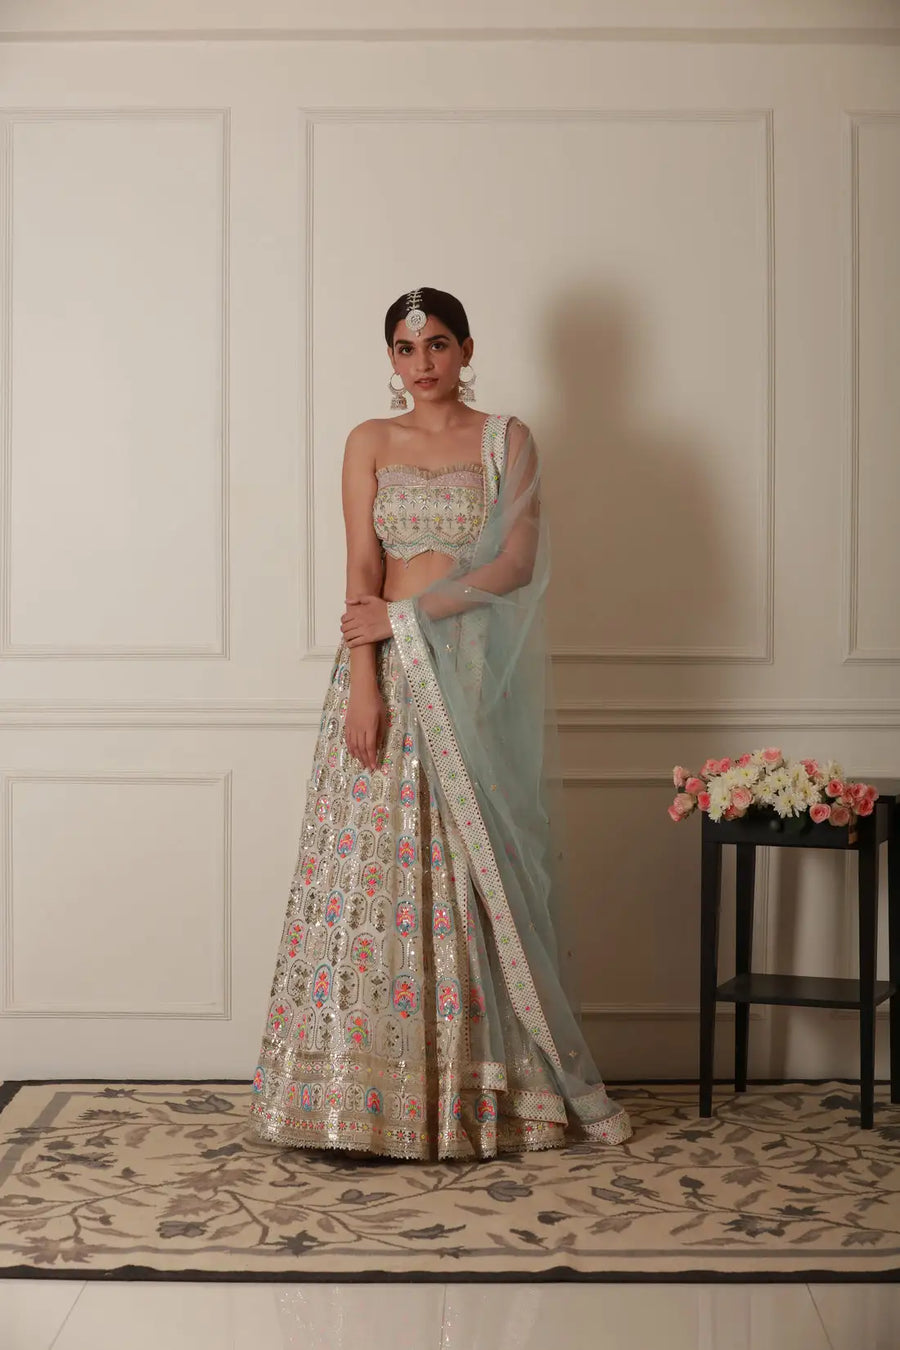 How to choose a bridal lehenga that compliments your body shape